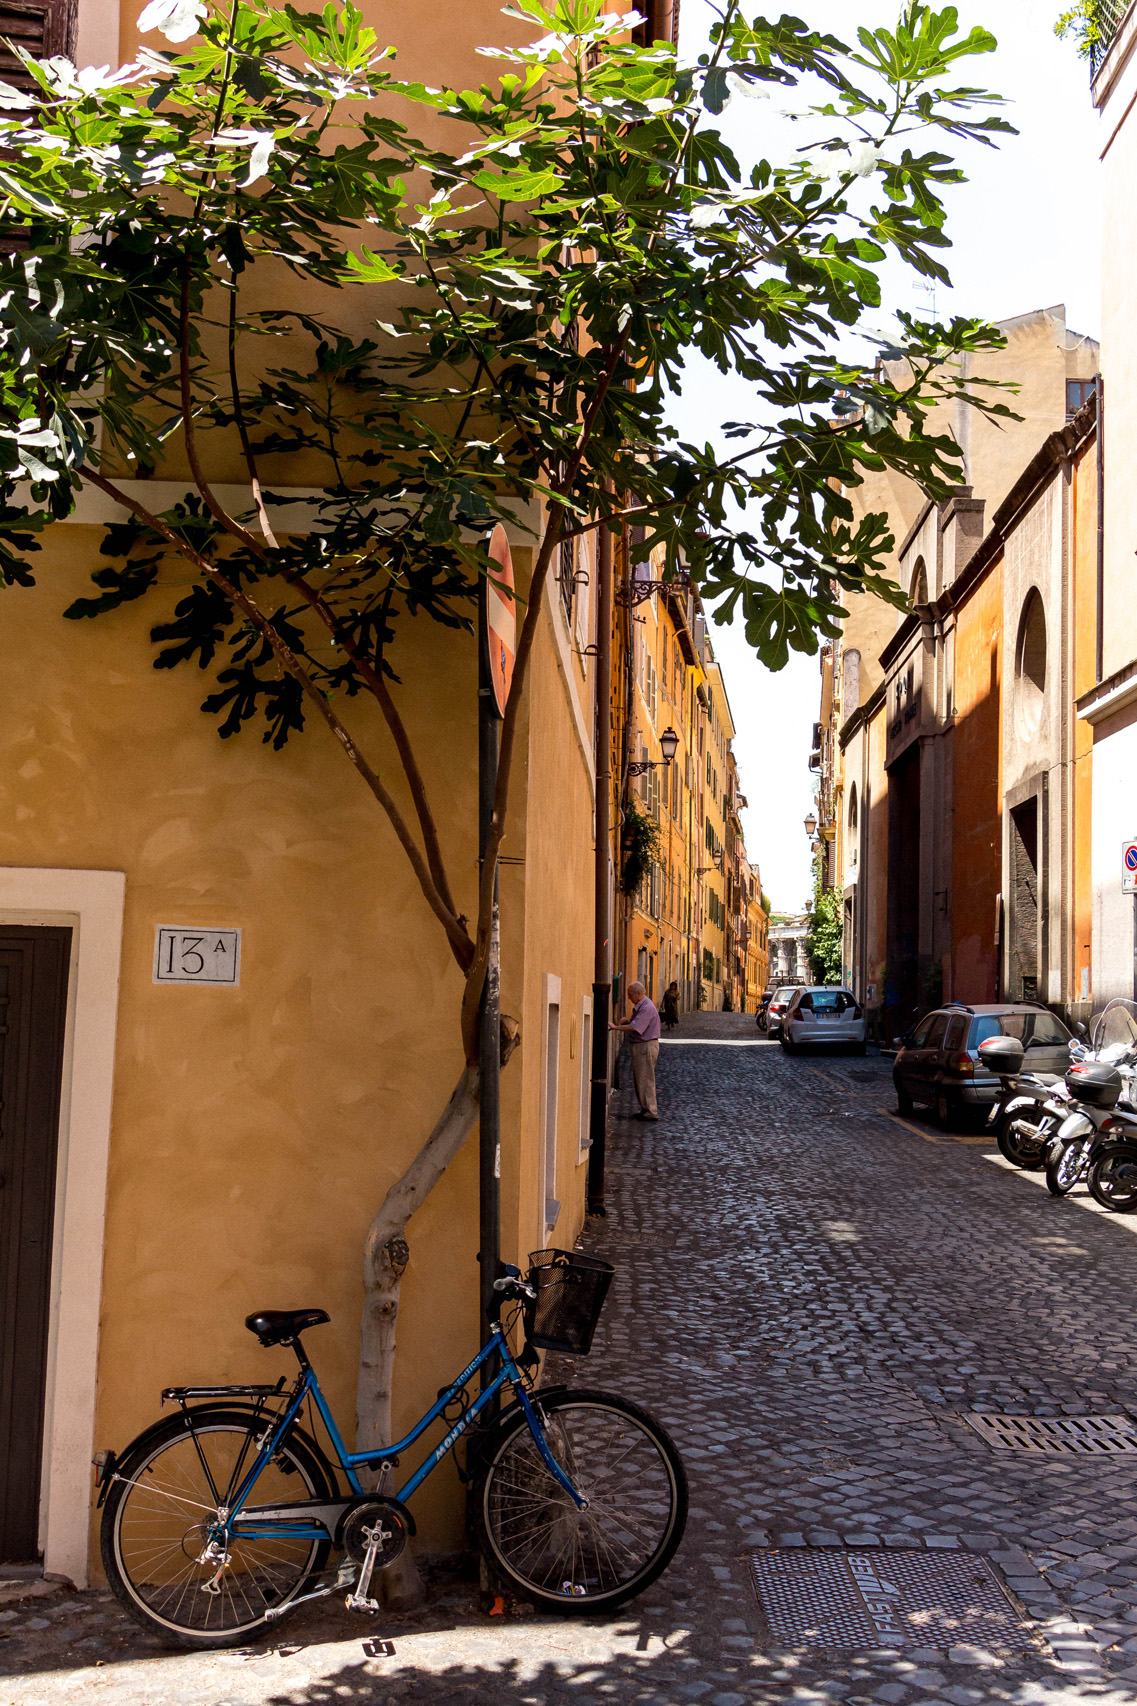 Streets of Monti, Rome